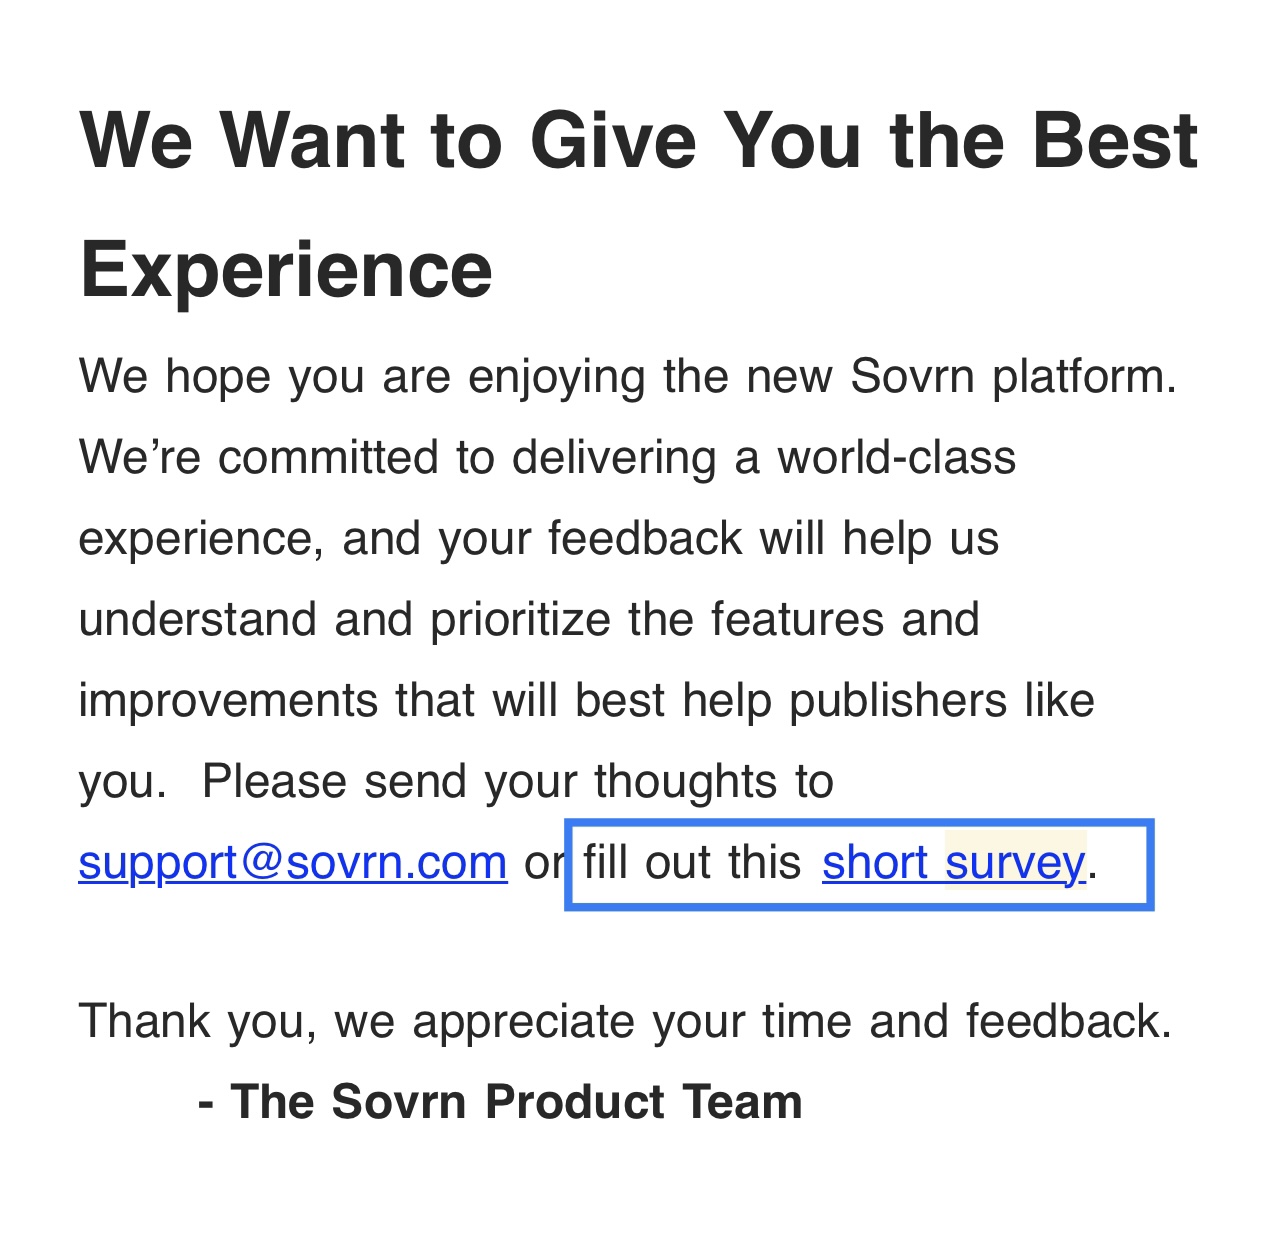 Example of a survey invitation sent via email with a hyperlink in the text